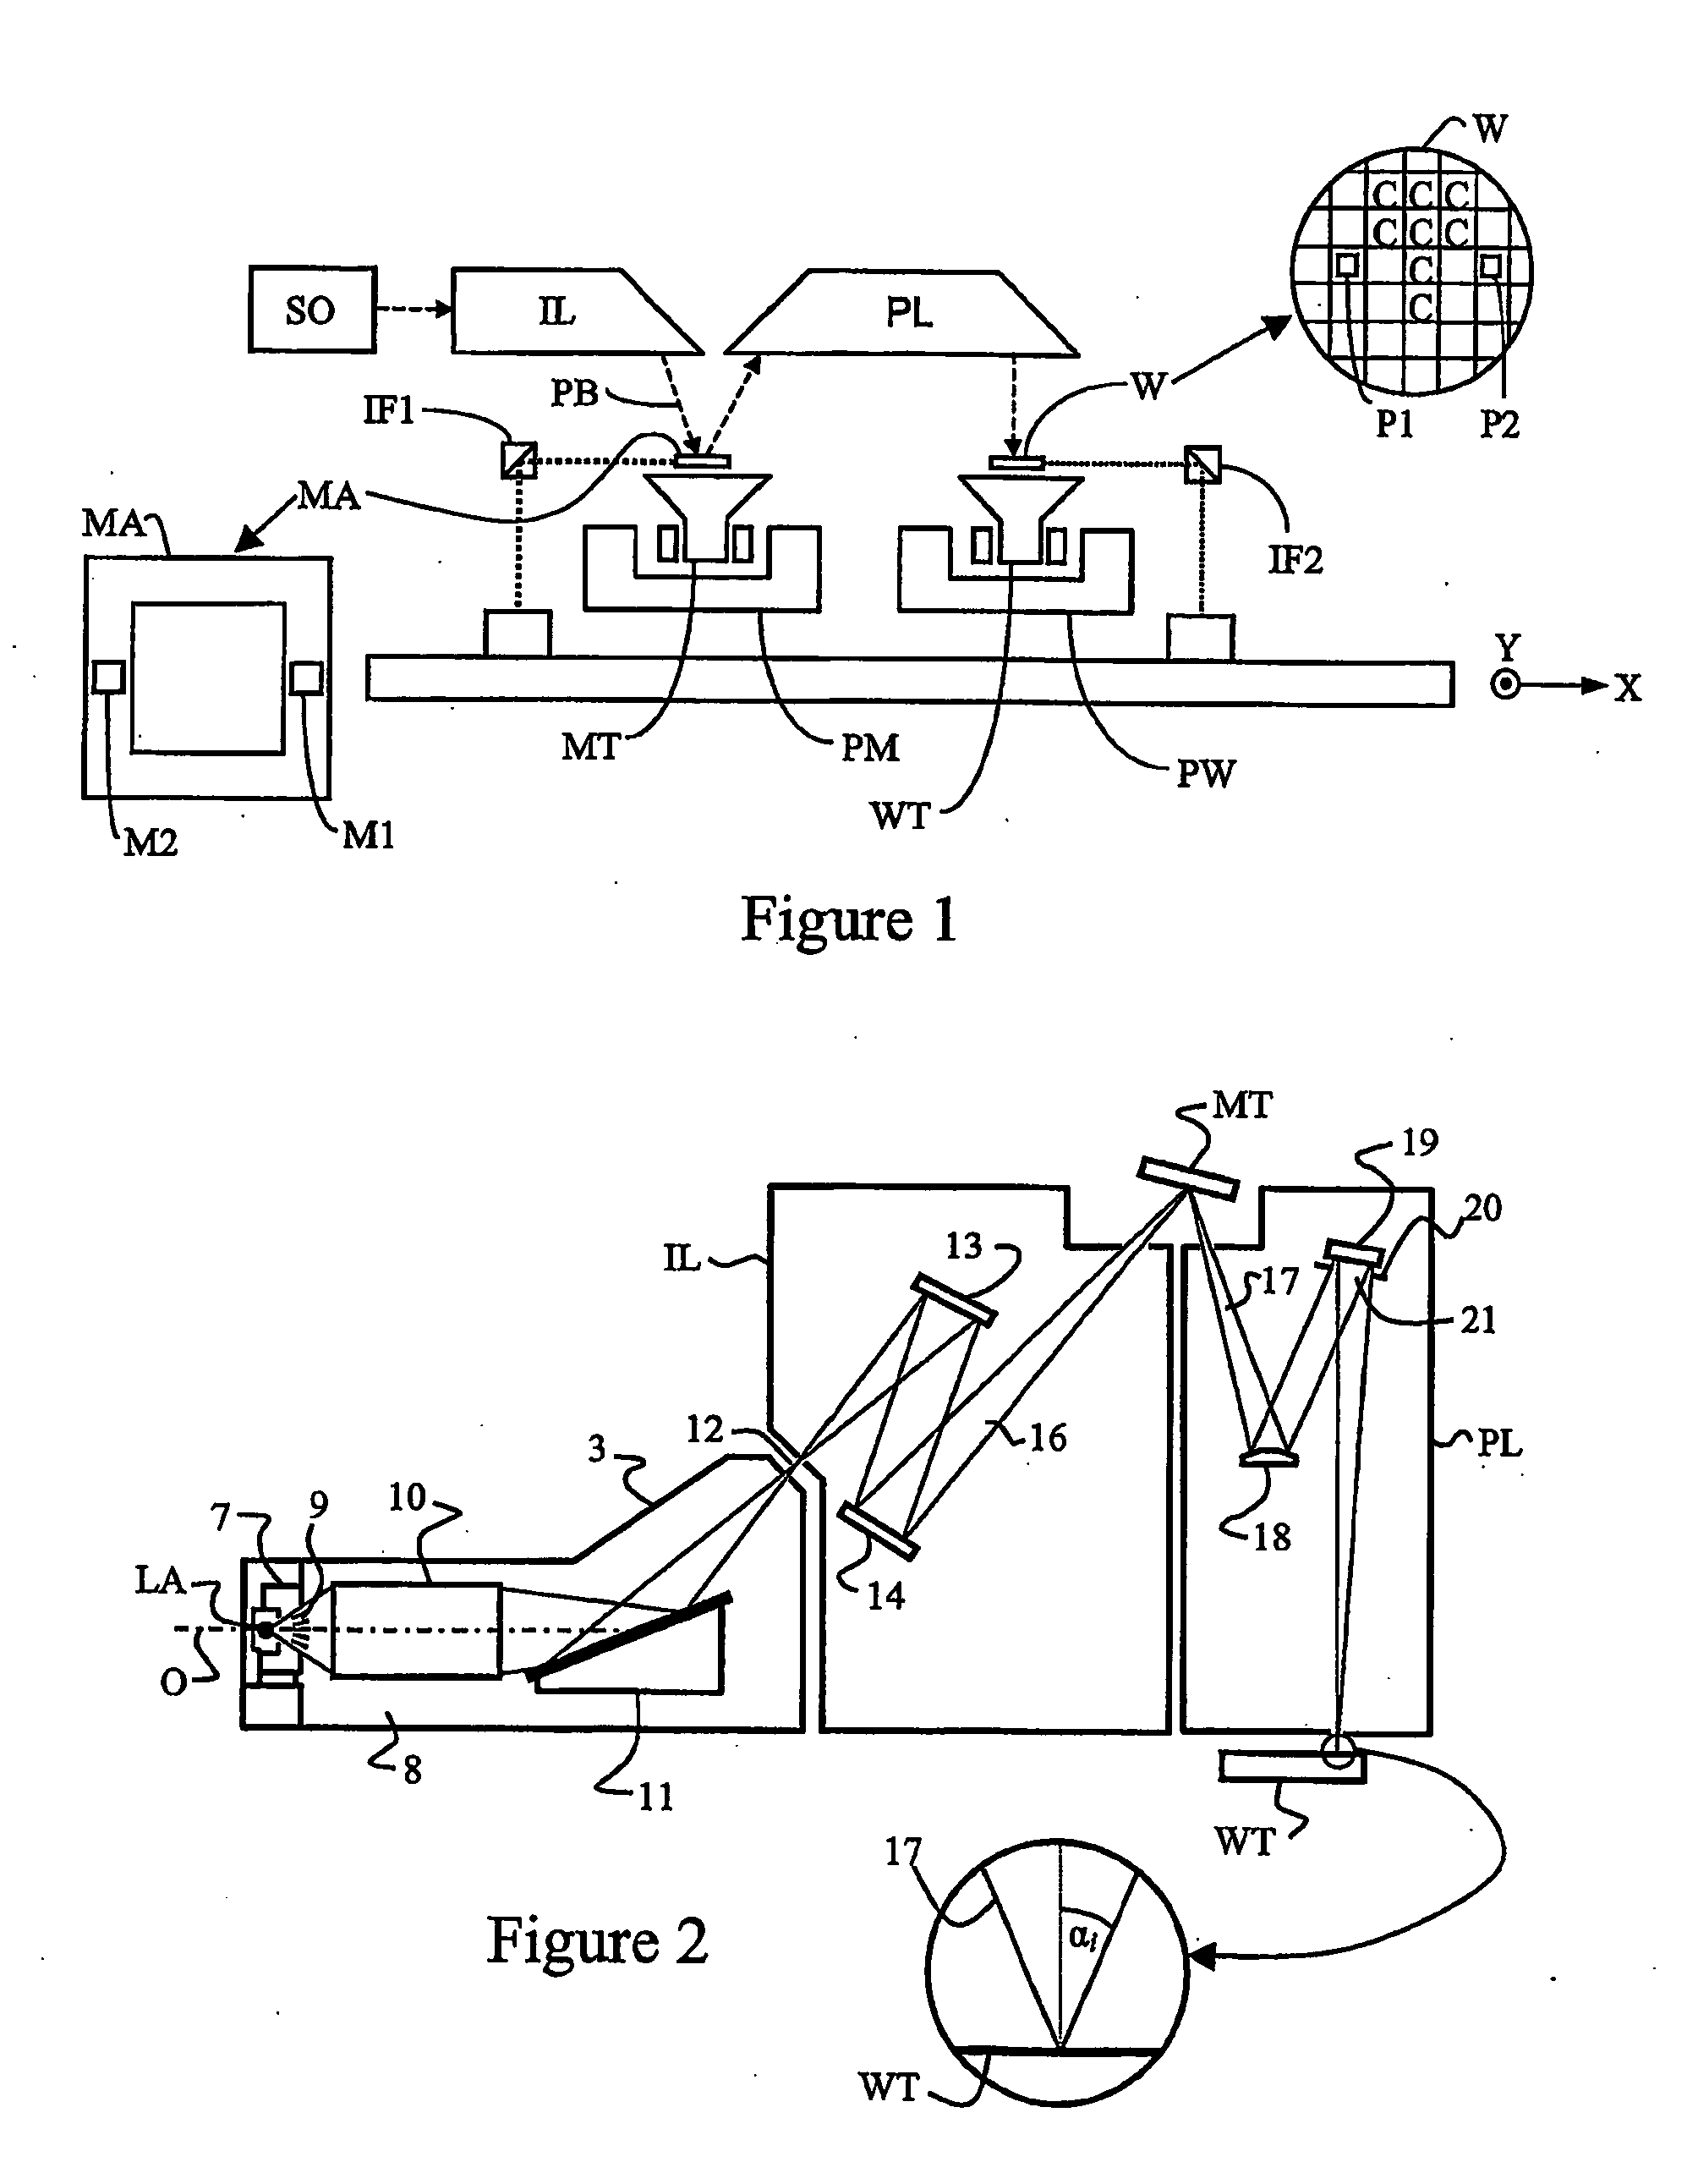 Use of a reticle absorber material in reducing aberrations